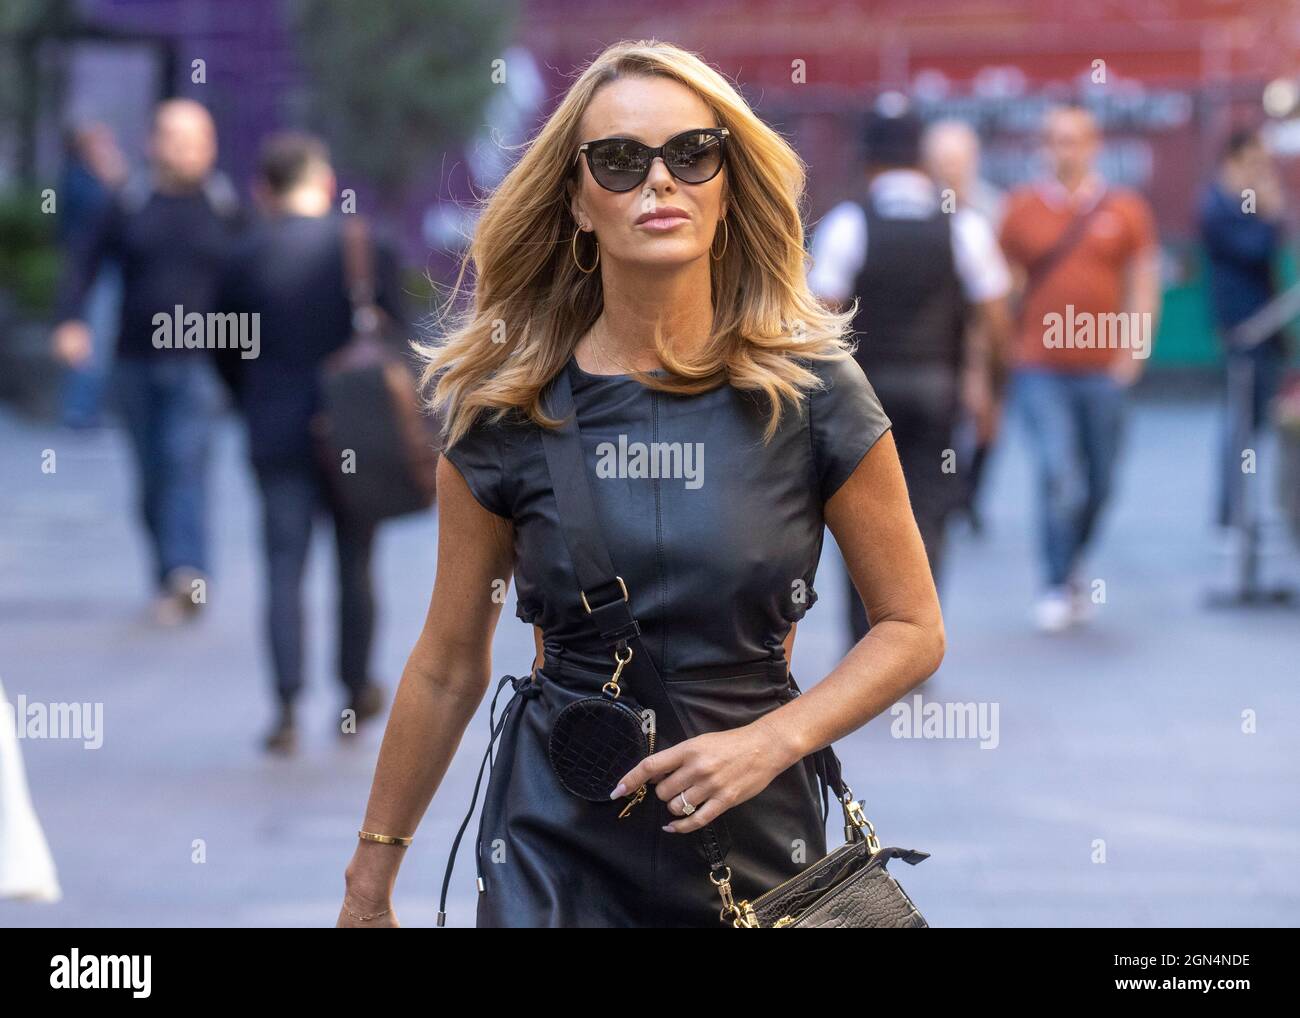 Actress and television presenter, Amanda Holden, leaves the offices of Global Radio after presenting her show on Heart. Stock Photo